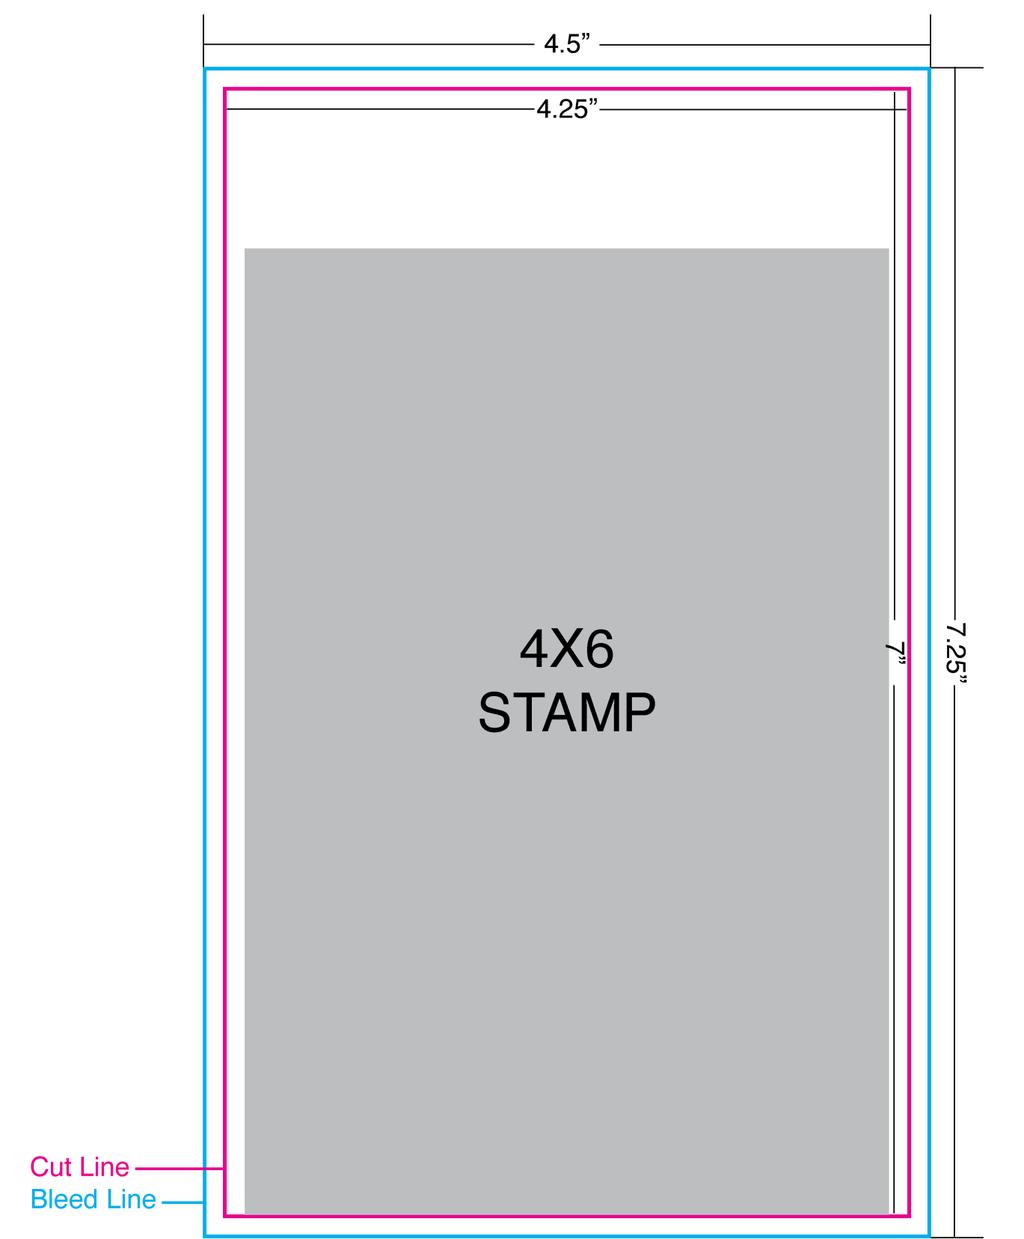 Templates for Inserts: Below is an example of a 4x6 insert template. Each size stamp set has a corresponding insert template which is downloadable.